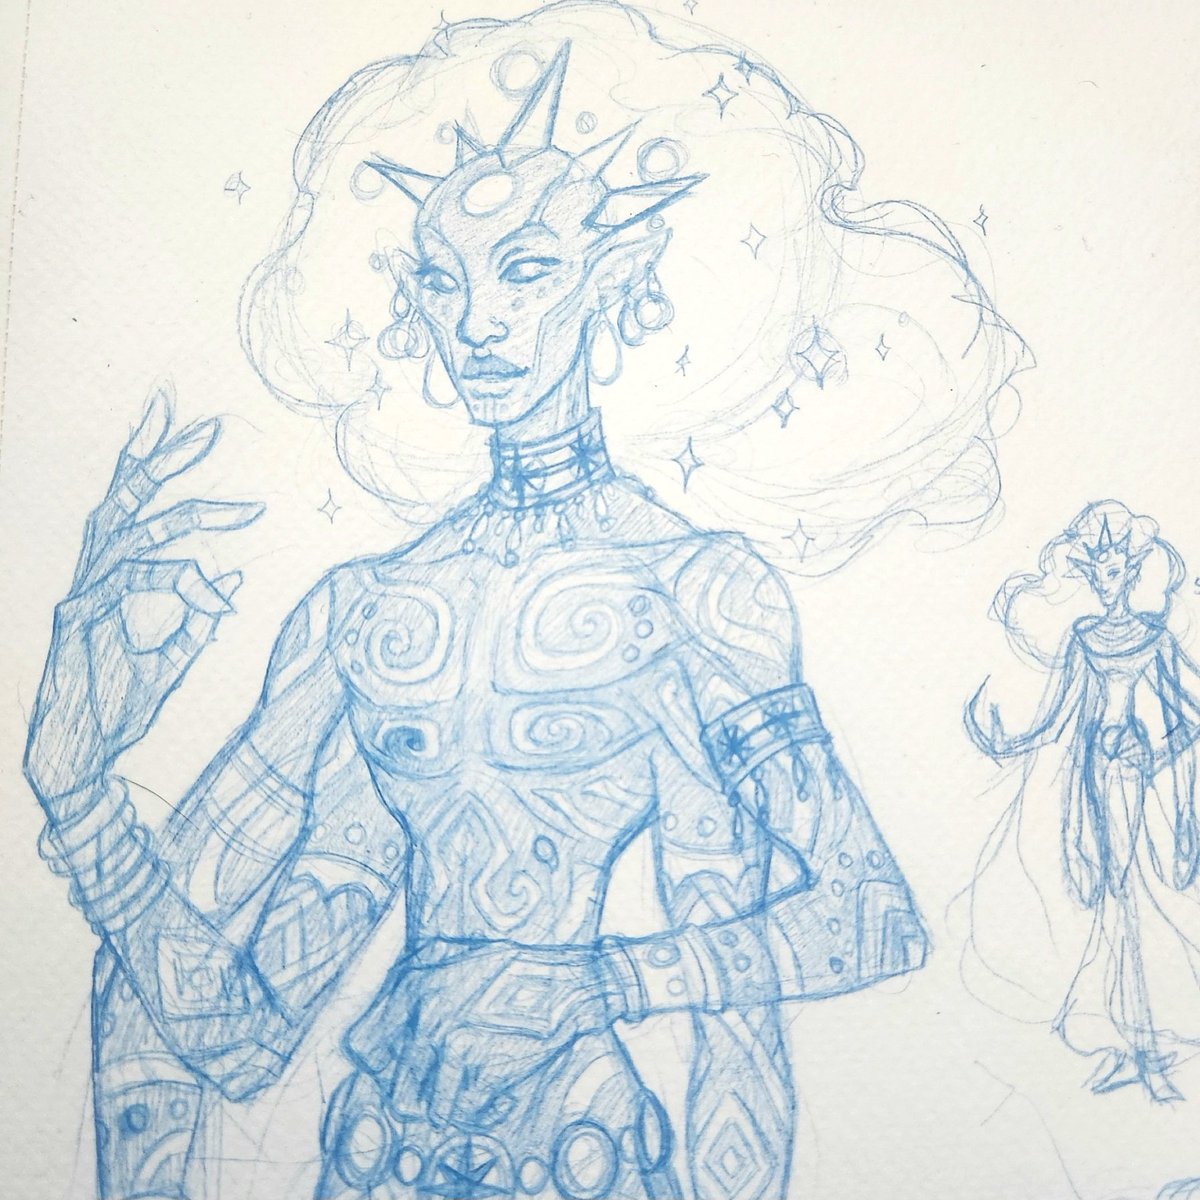 Had a lot of fun sketching these nerds last night. More prep for my comic by doing some noodles. Check out an ancient star babe, So'ri. They bond over alchemy. Like I said, nerds. 

#OCArt #originalcharacter #comiccharacter #originalcomic #queerart #queerartist #characterdesign